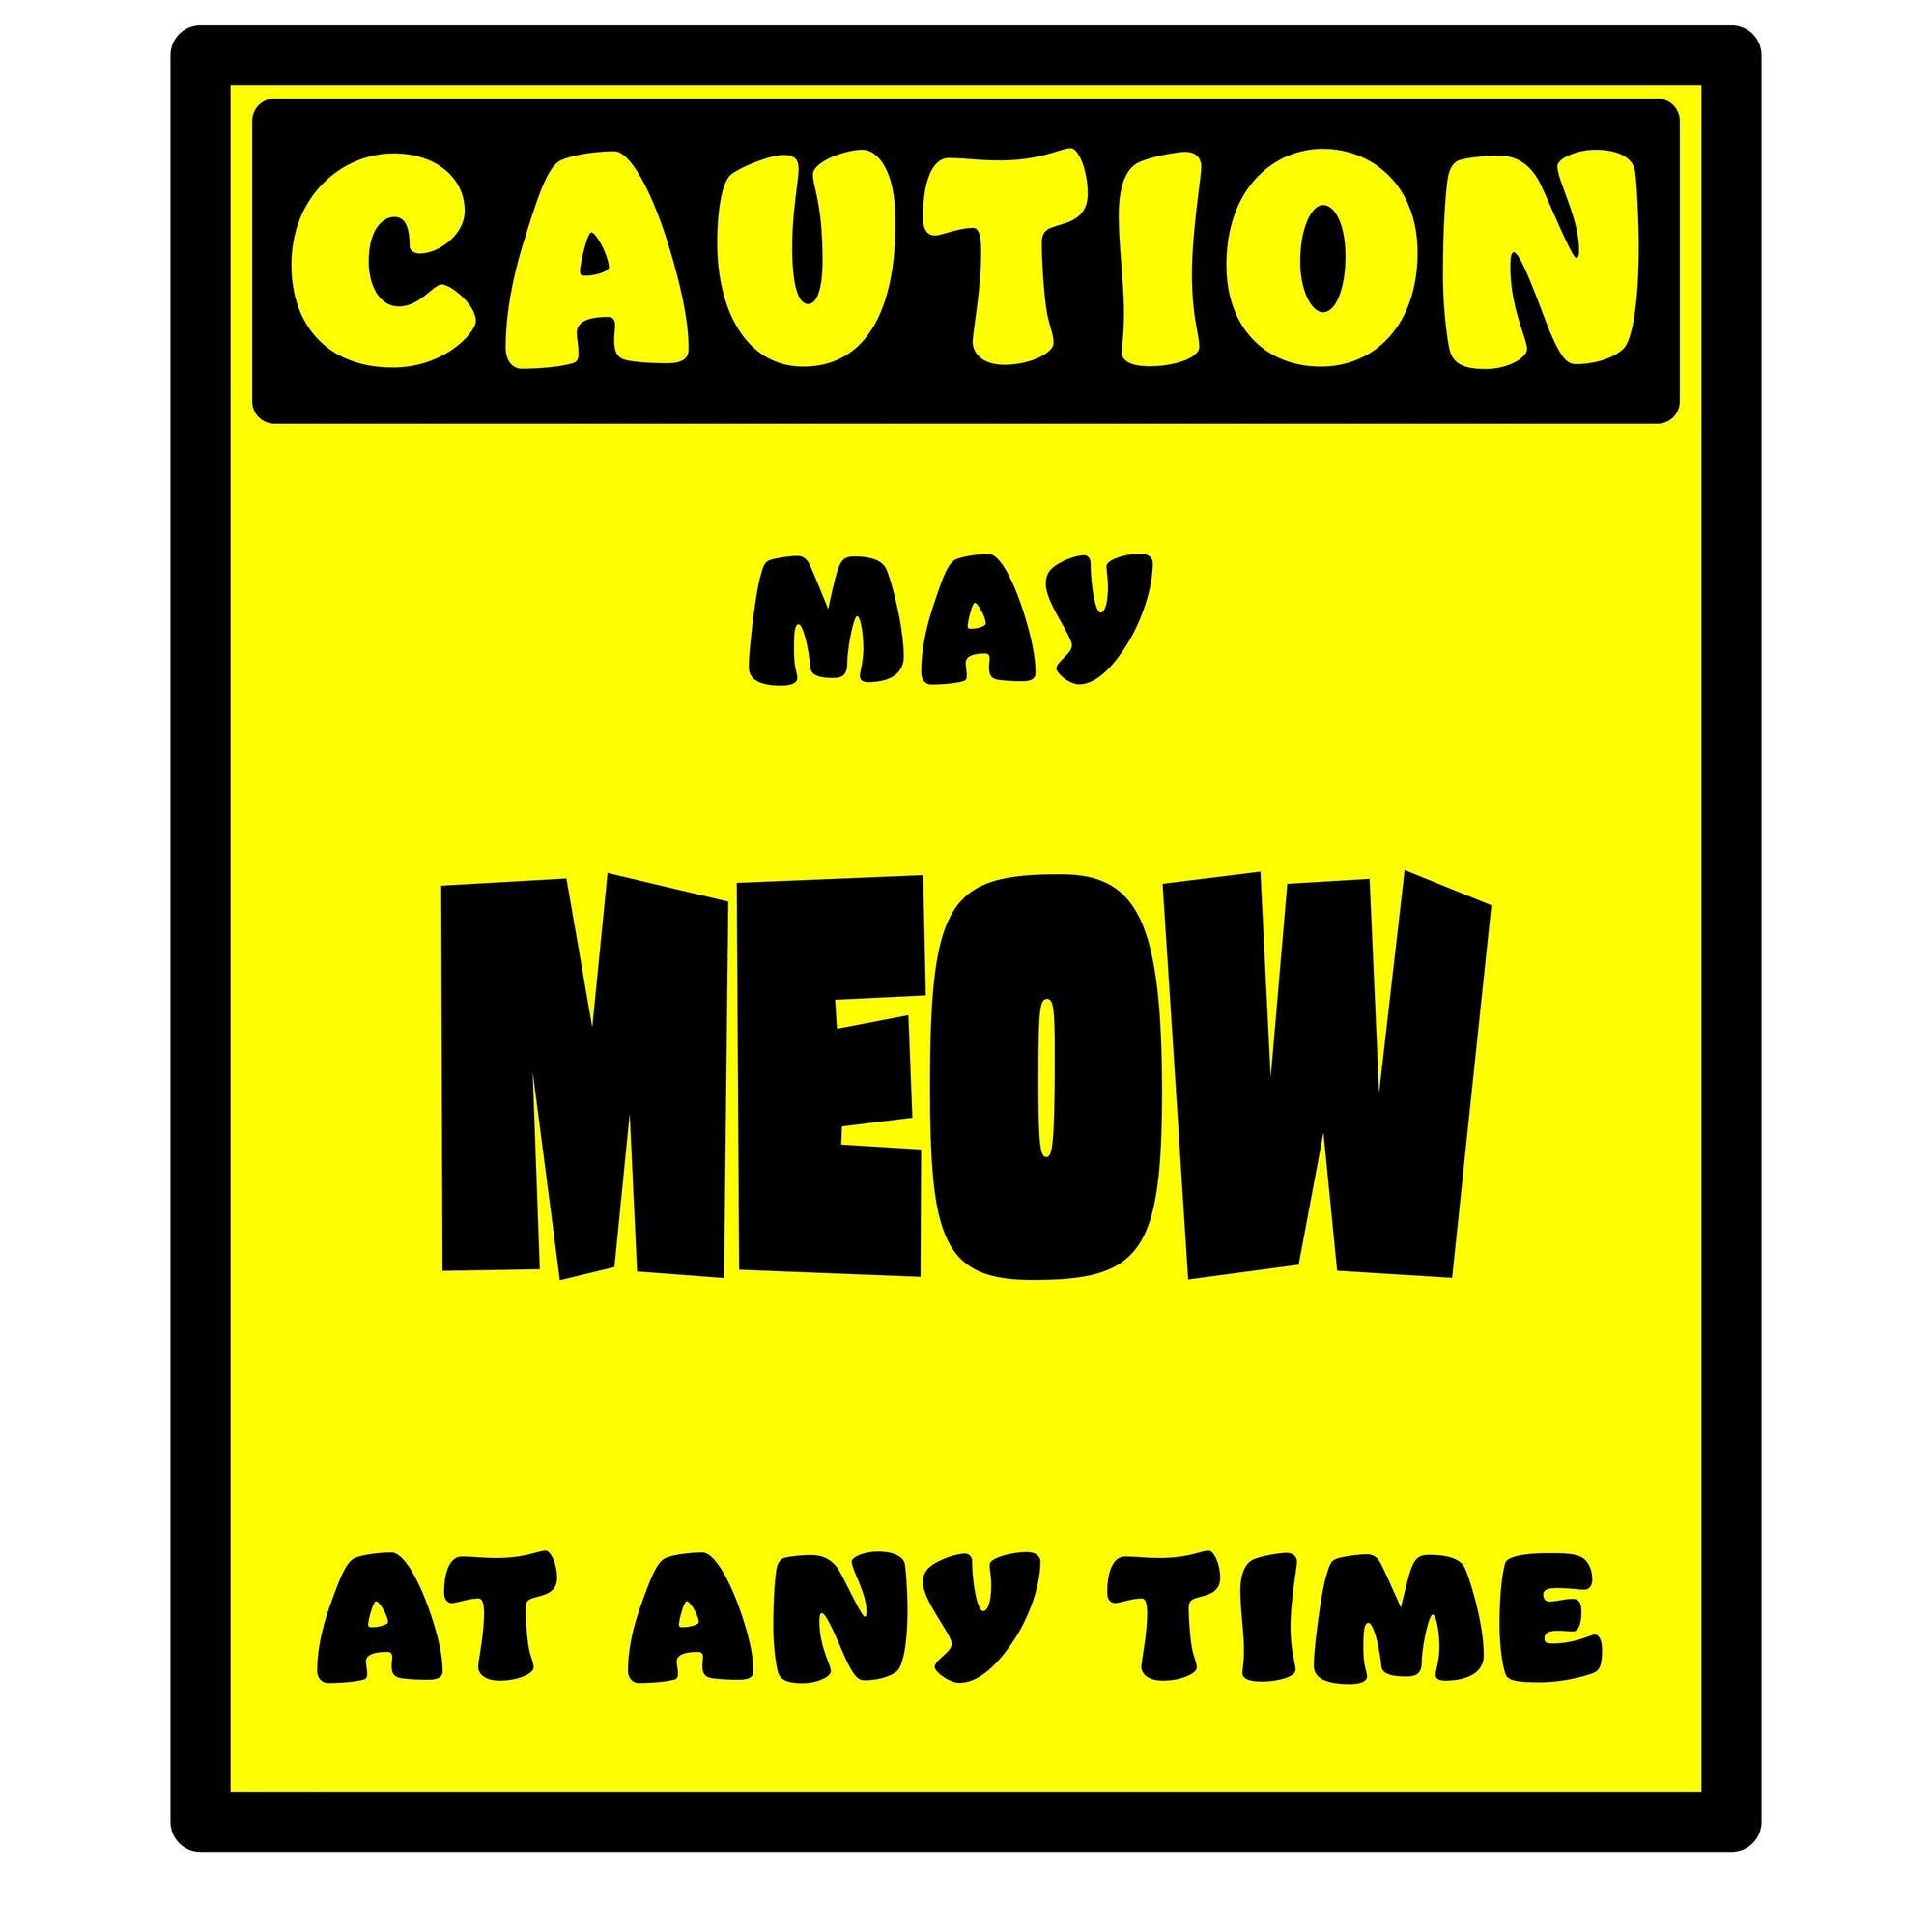 Whootorca - Caution! Series - CAUTION! May MEOW at any time!